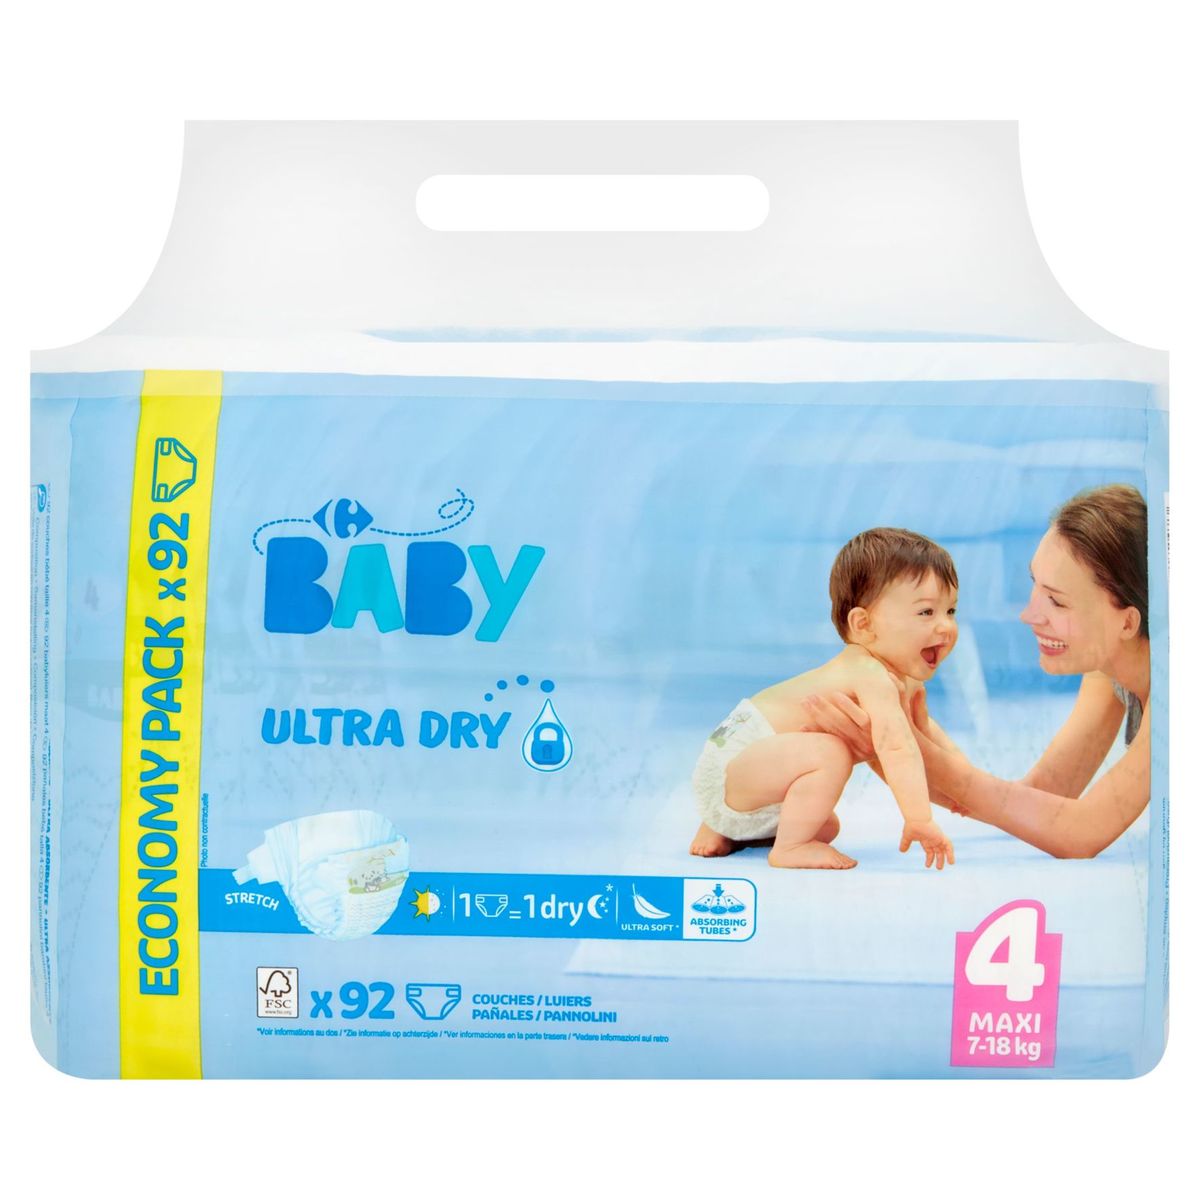 Carrefour Baby Ultra Dry 4 Maxi 7-18 kg Economy Pack 92 Couches